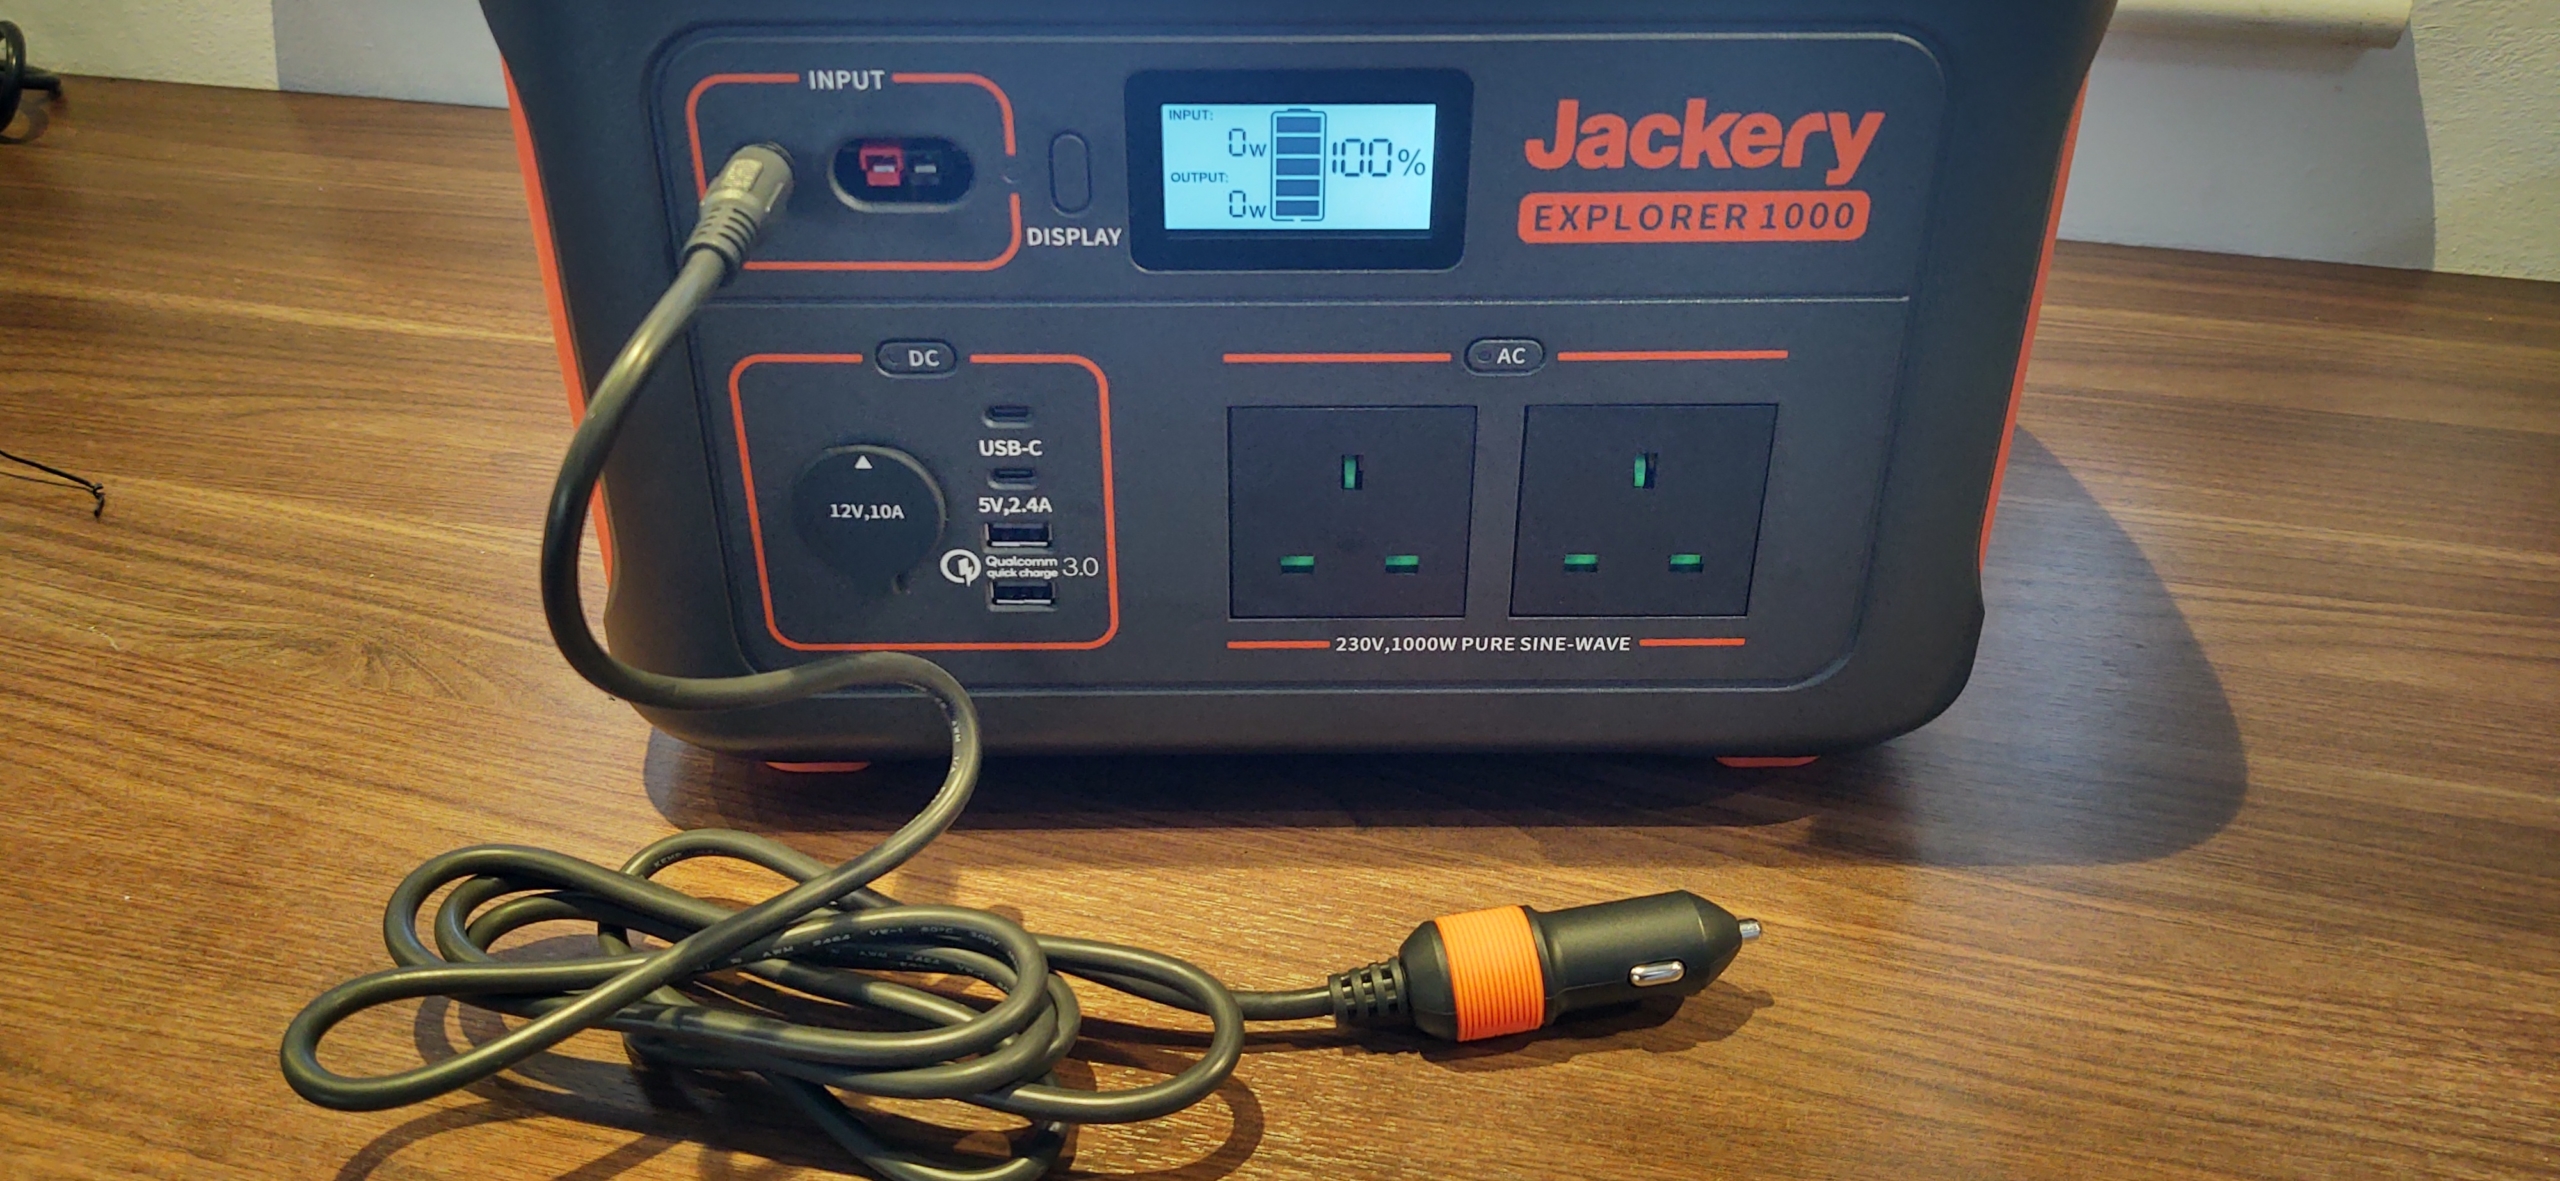 Can you Boil A Kettle With a Jackery Explorer 1000 Power Pack???? 